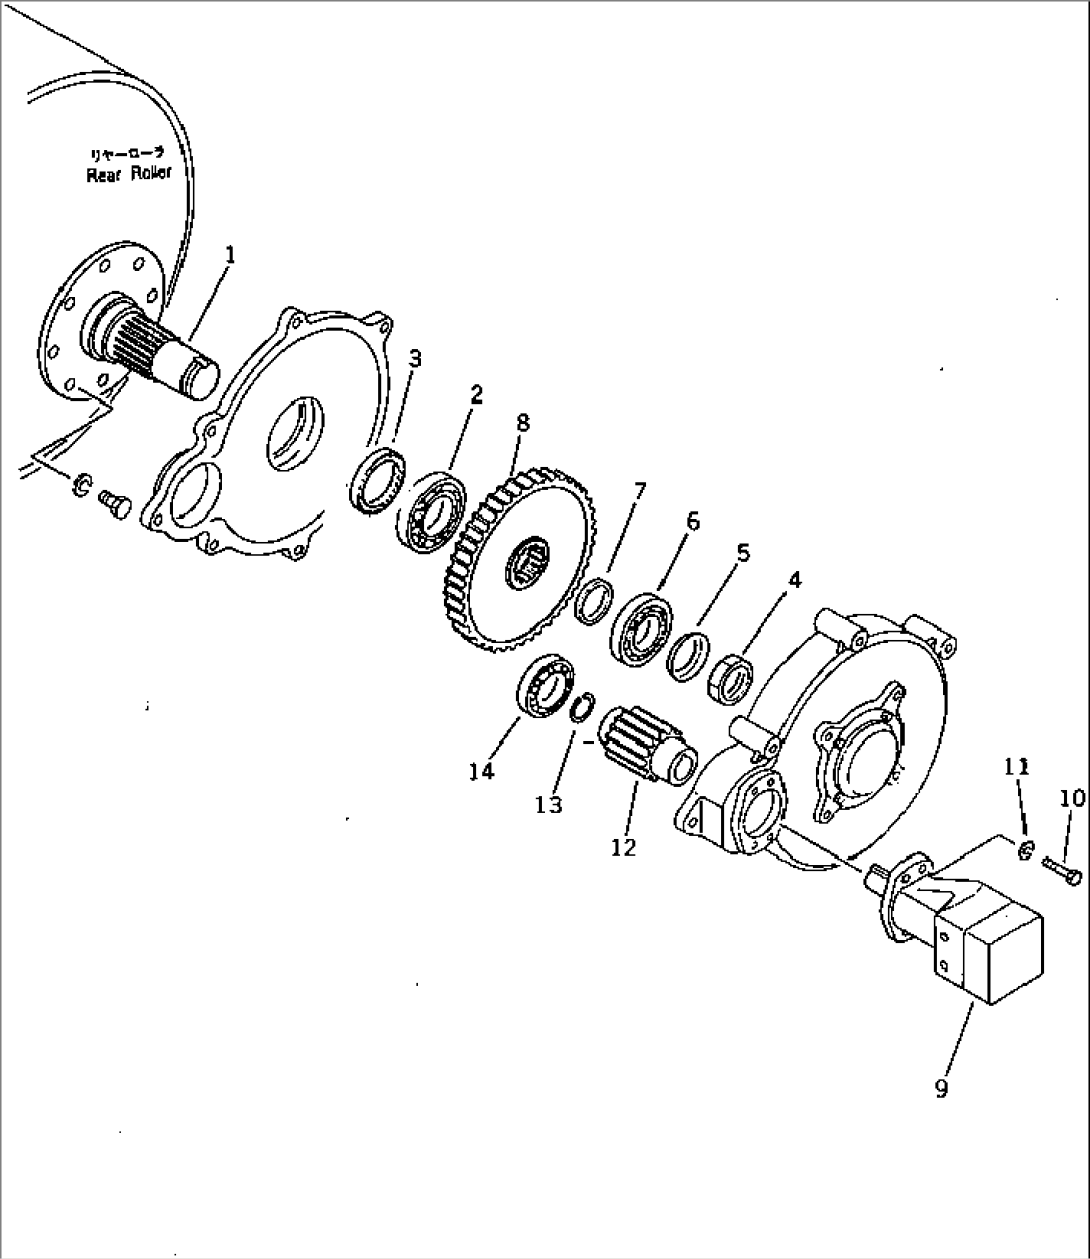 REAR ROLLER (4/4) (TRAVEL MOTOR AND FINAL DRIVE GEAR)